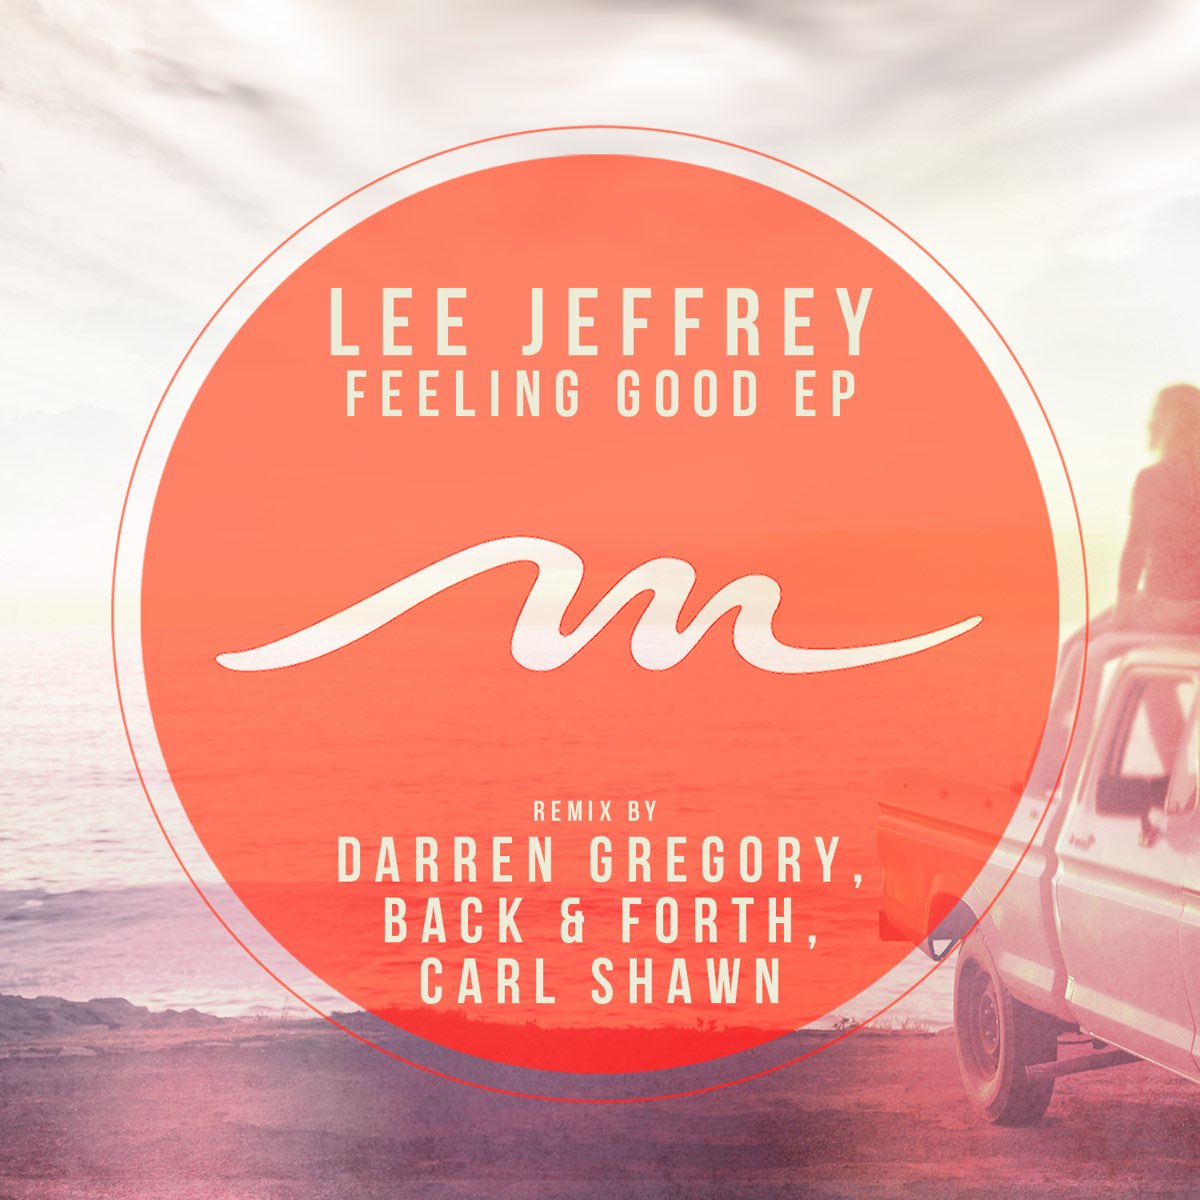 Can you feel good. Feeling good оригинал. C'mon Jeffrey you can do it. Come on Jeffrey you can do it Ноты. Common Jeffrey you can do it.